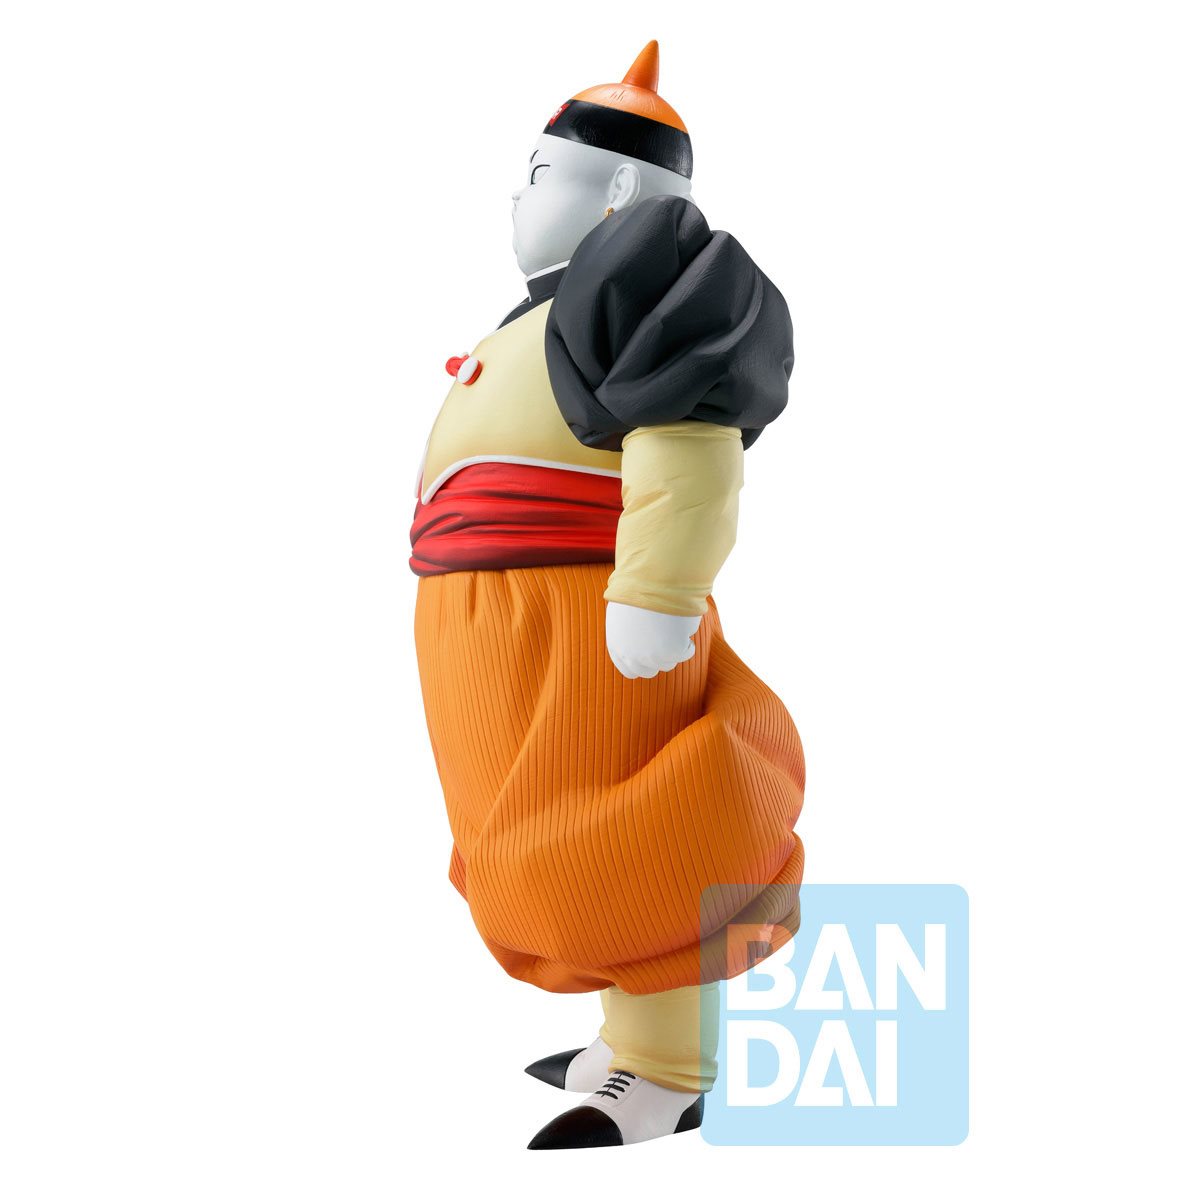 JAN228655 - DRAGON BALL Z ANDROID FEAR ANDROID NO 17 PX ICHIBAN FIG (NET -  Previews World